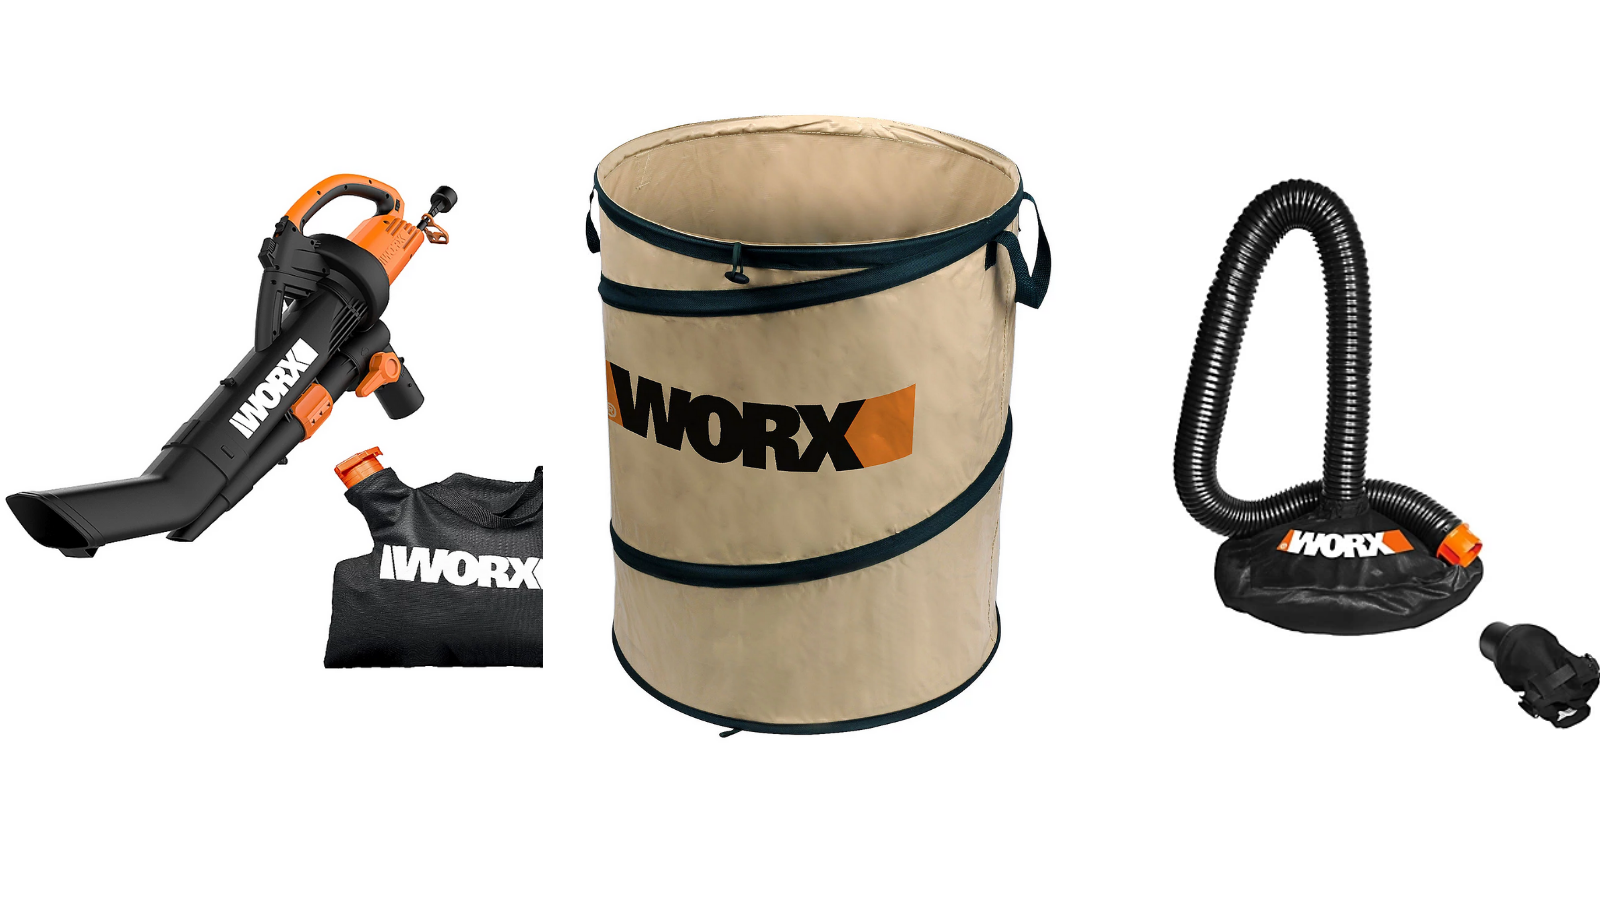 Worx leaf collection items on white background